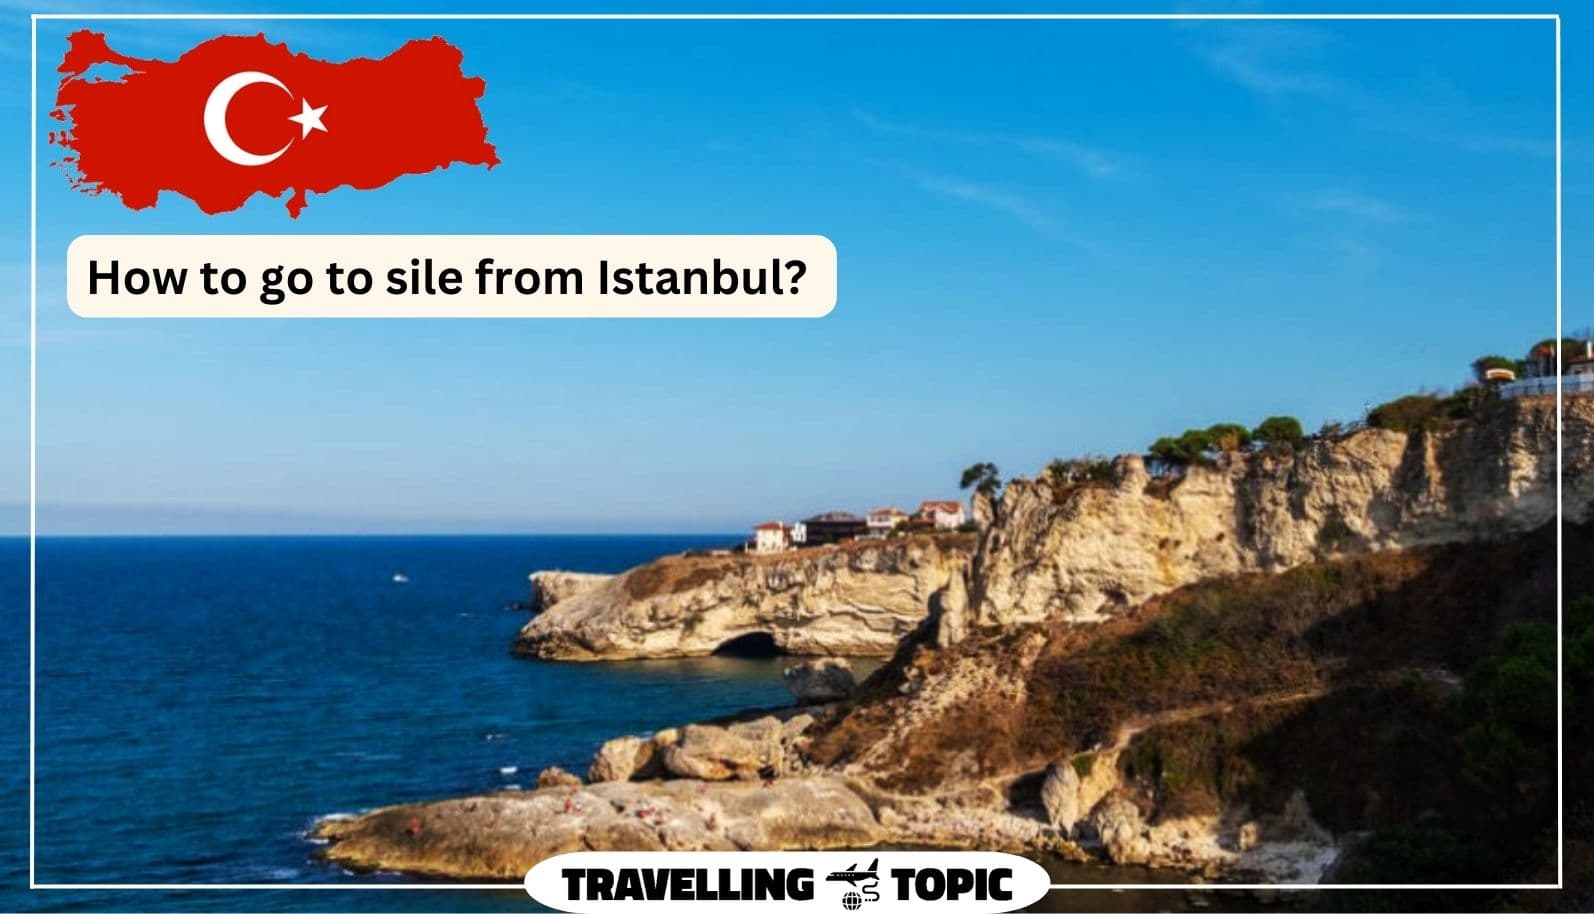 How to go to sile from Istanbul? 